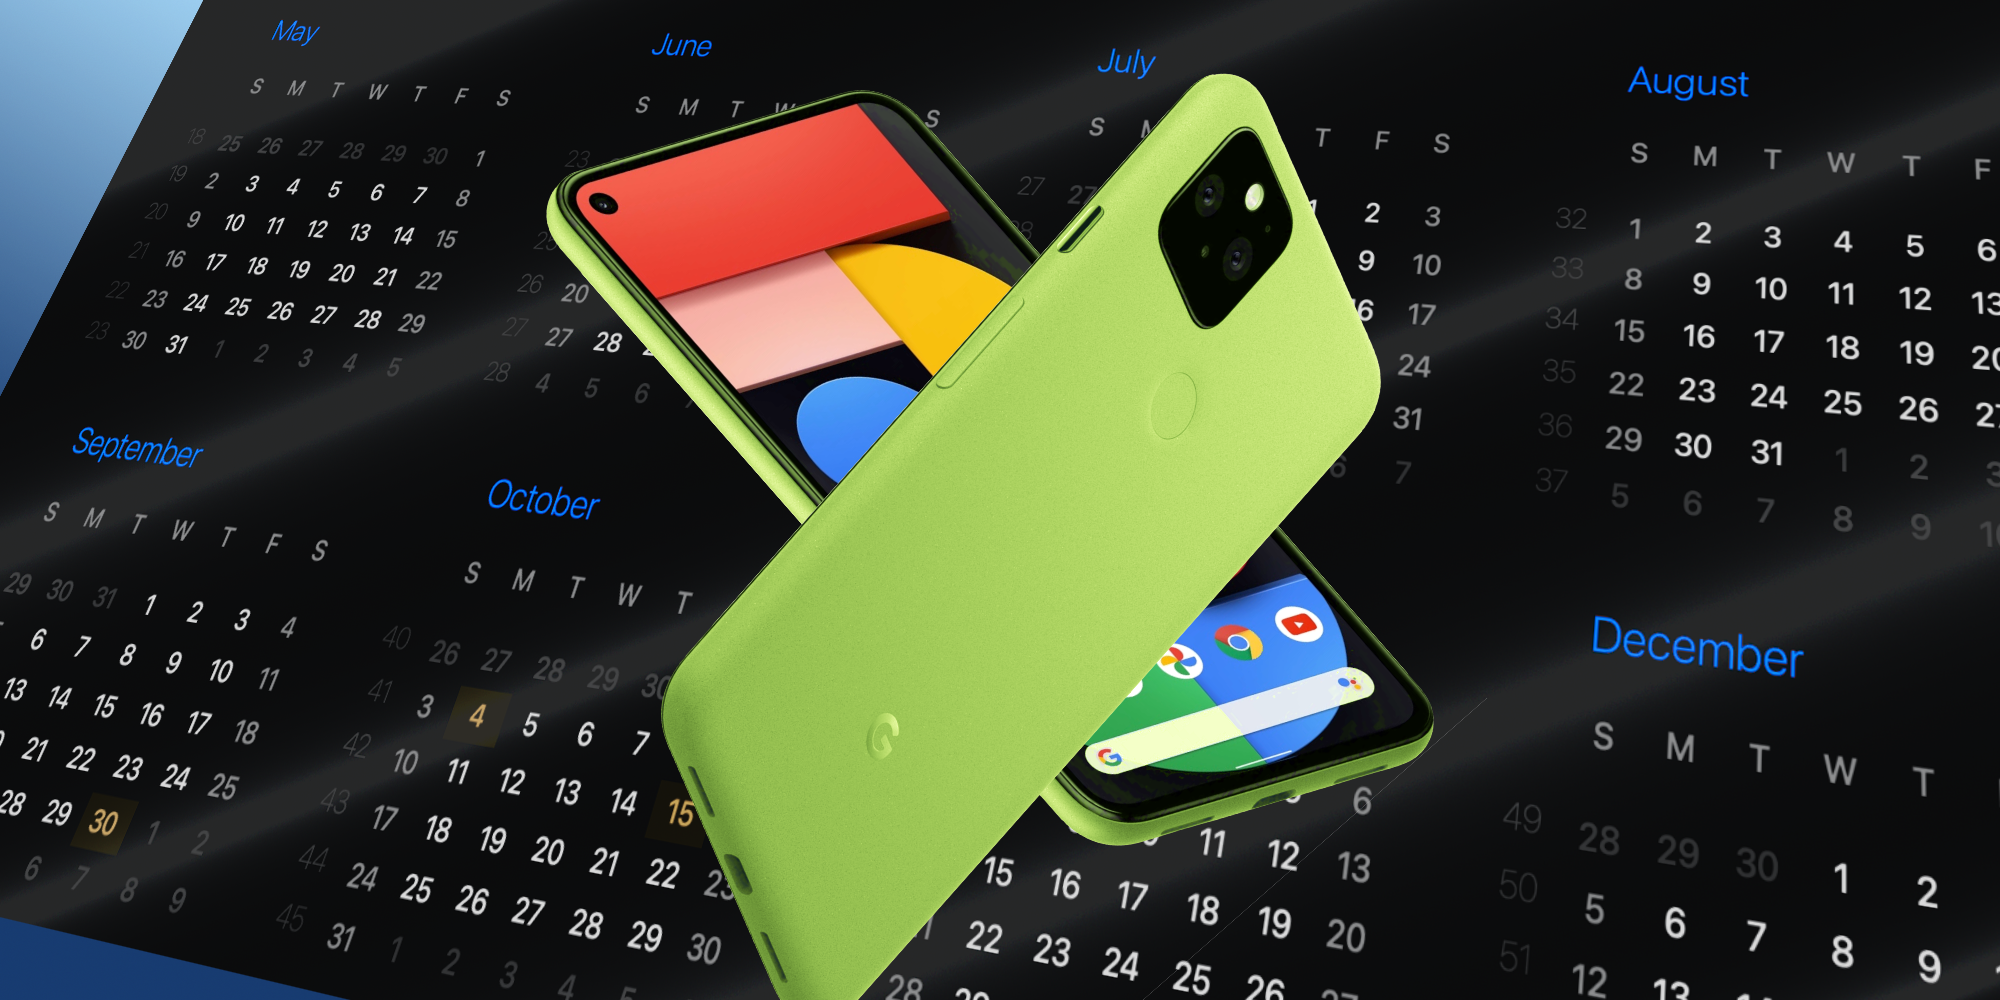 Google Pixle 5 Rendered As Bright Green Over Calendar